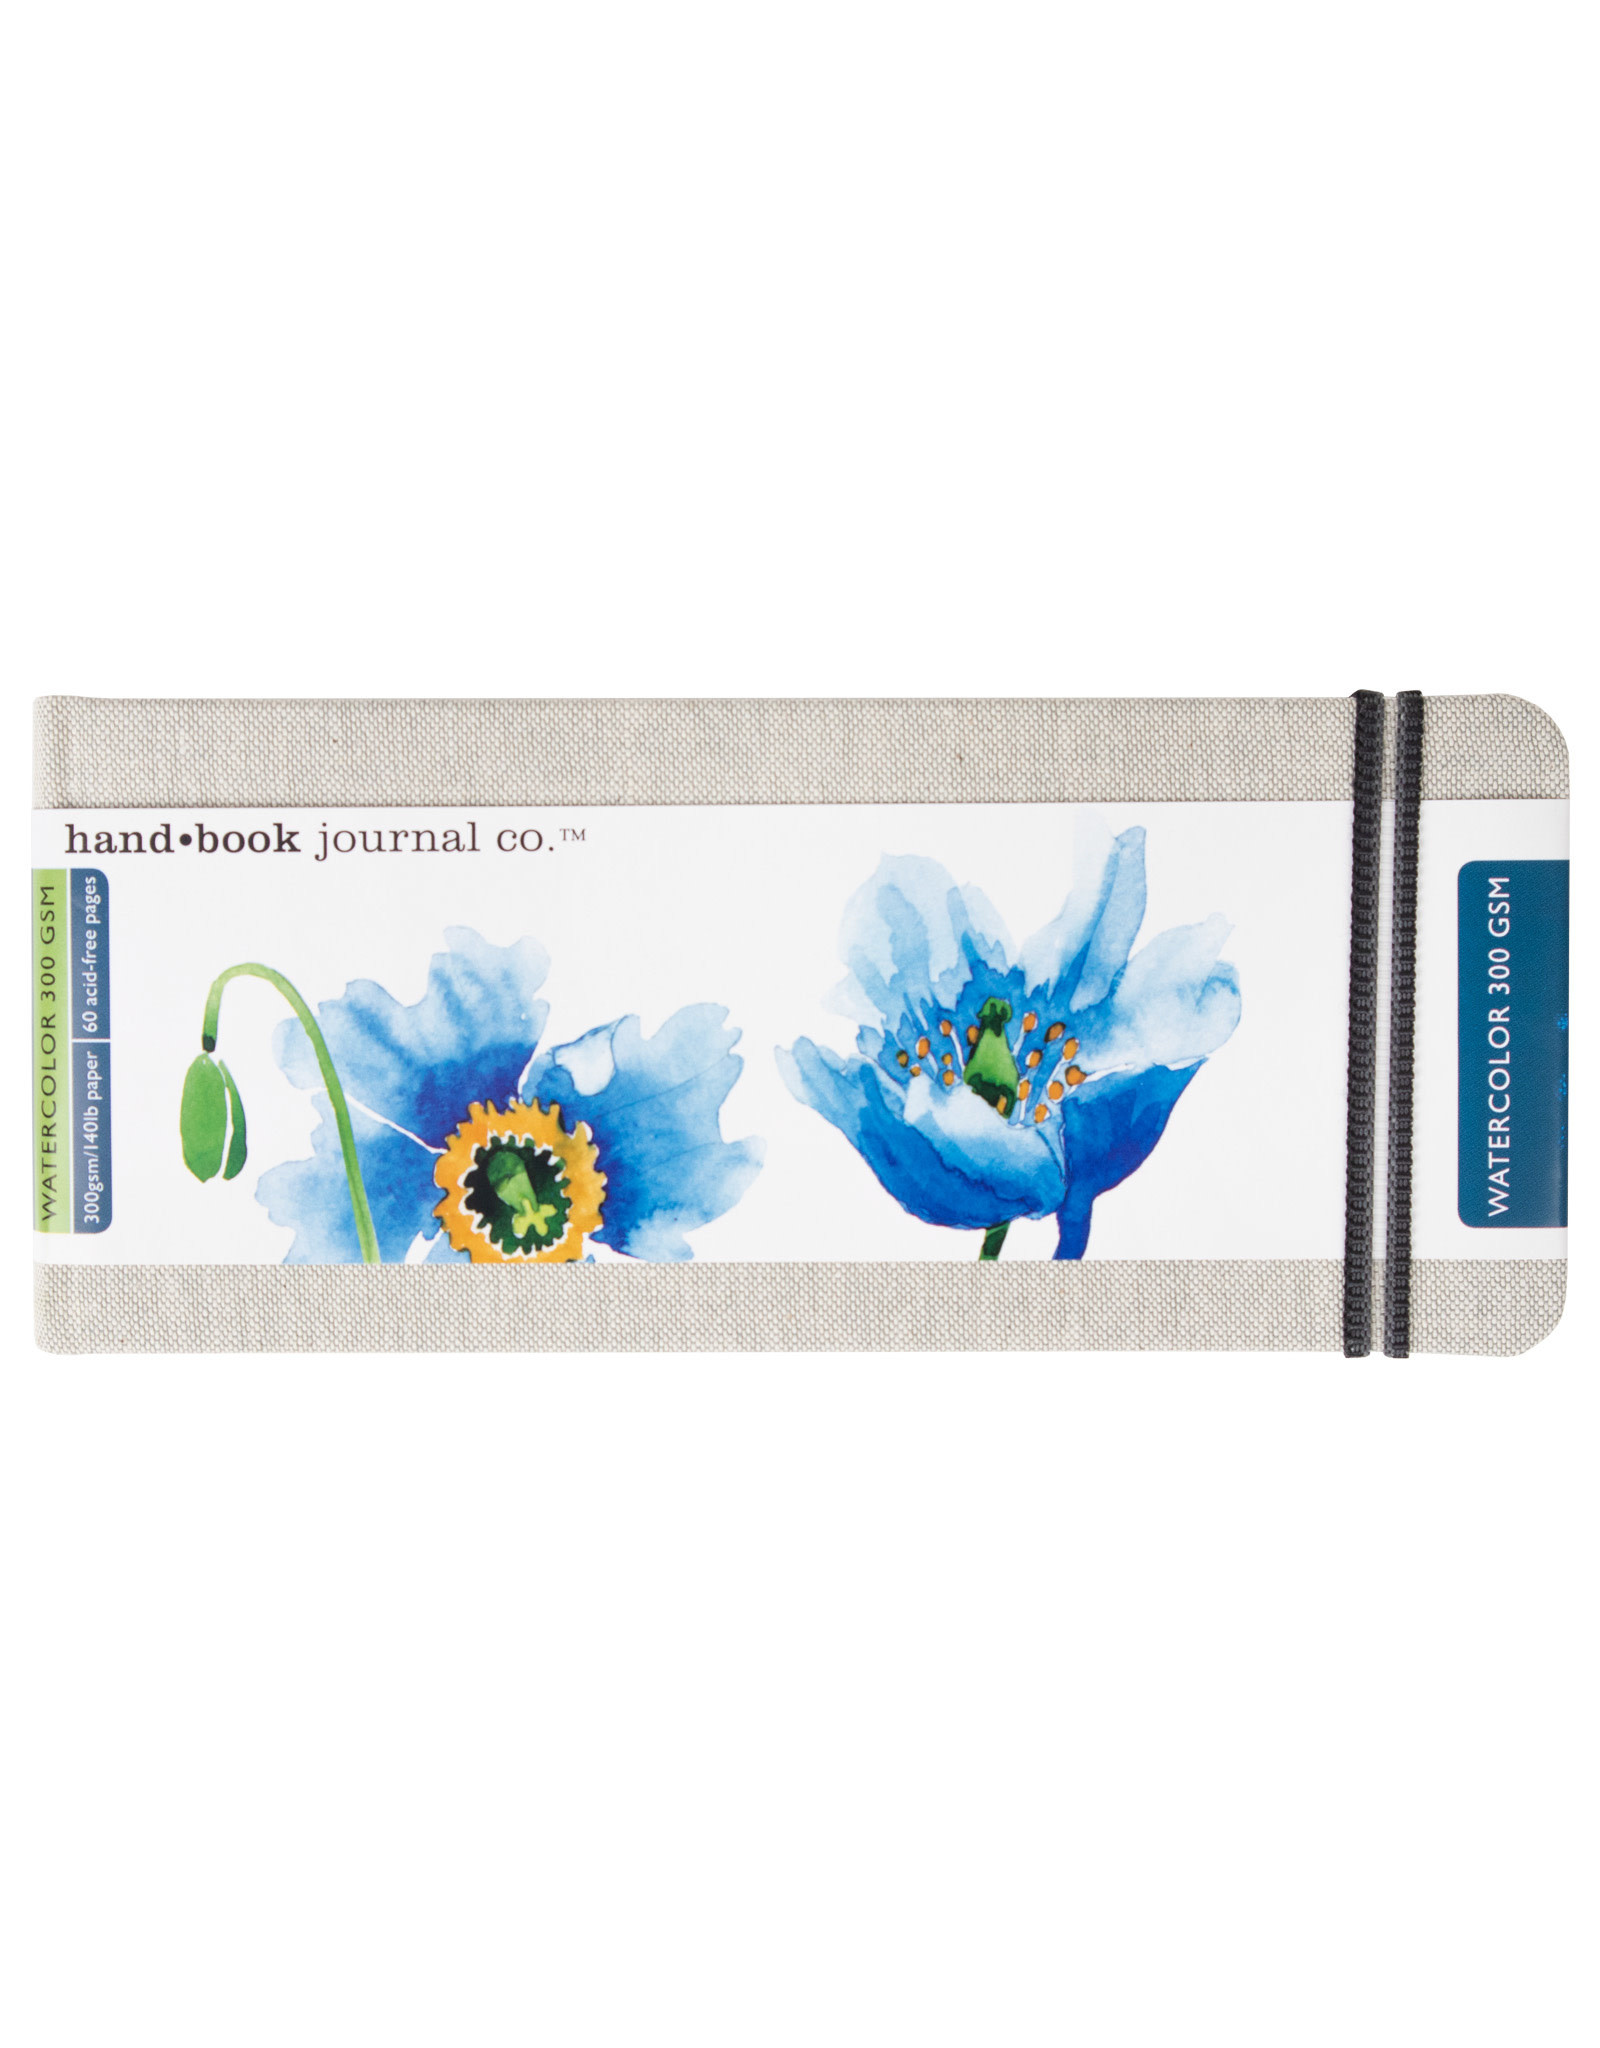 SPEEDBALL ART PRODUCTS Travelogue Watercolor Journal, Pocket Panorama, 3 1/2" x 8 1/4" 300gsm